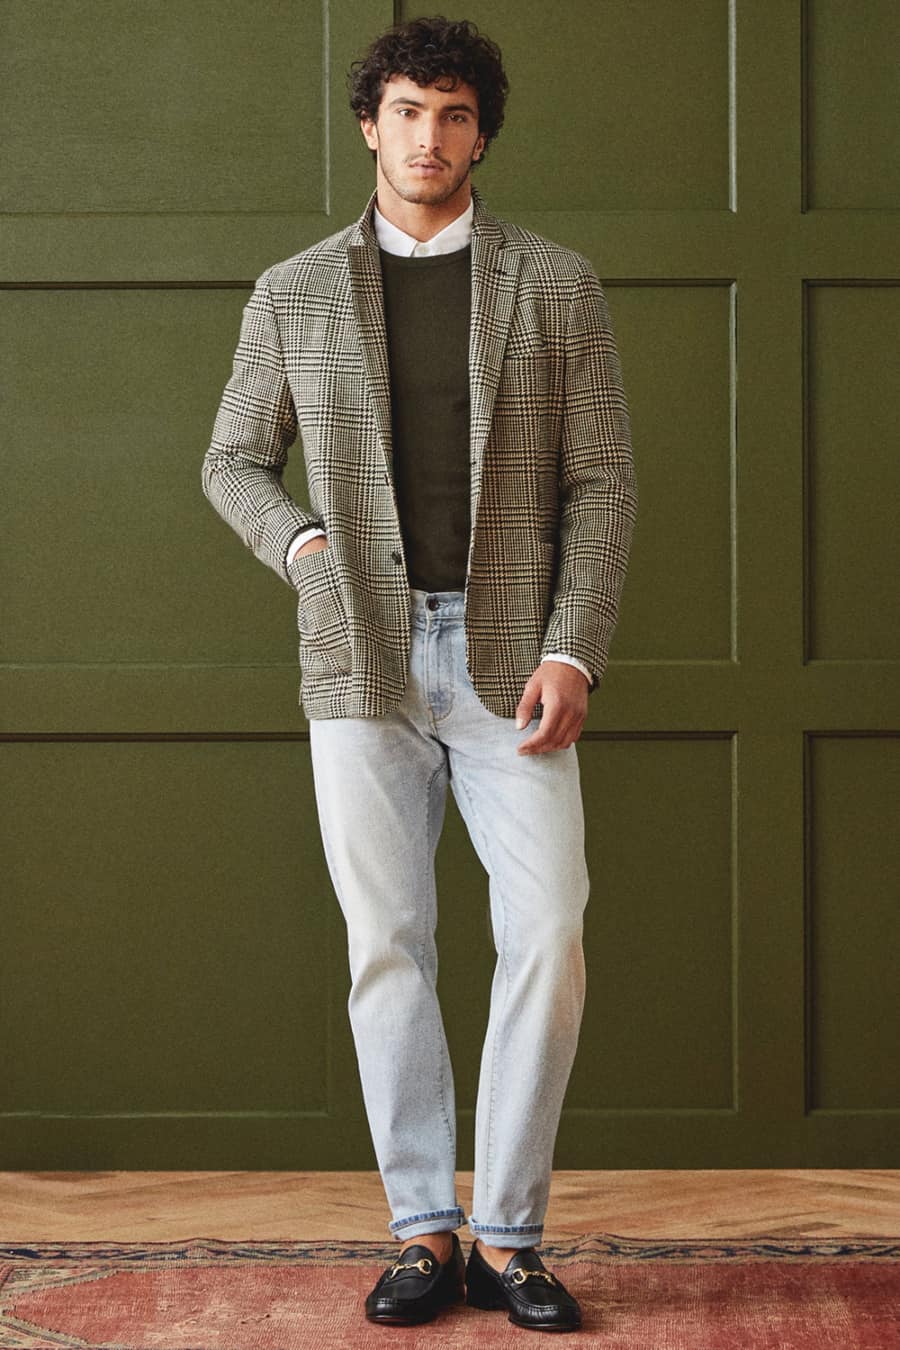 Men's light wash jeans, white shirt, sweater, Prince of Wales checked blazer and black loafers outfit